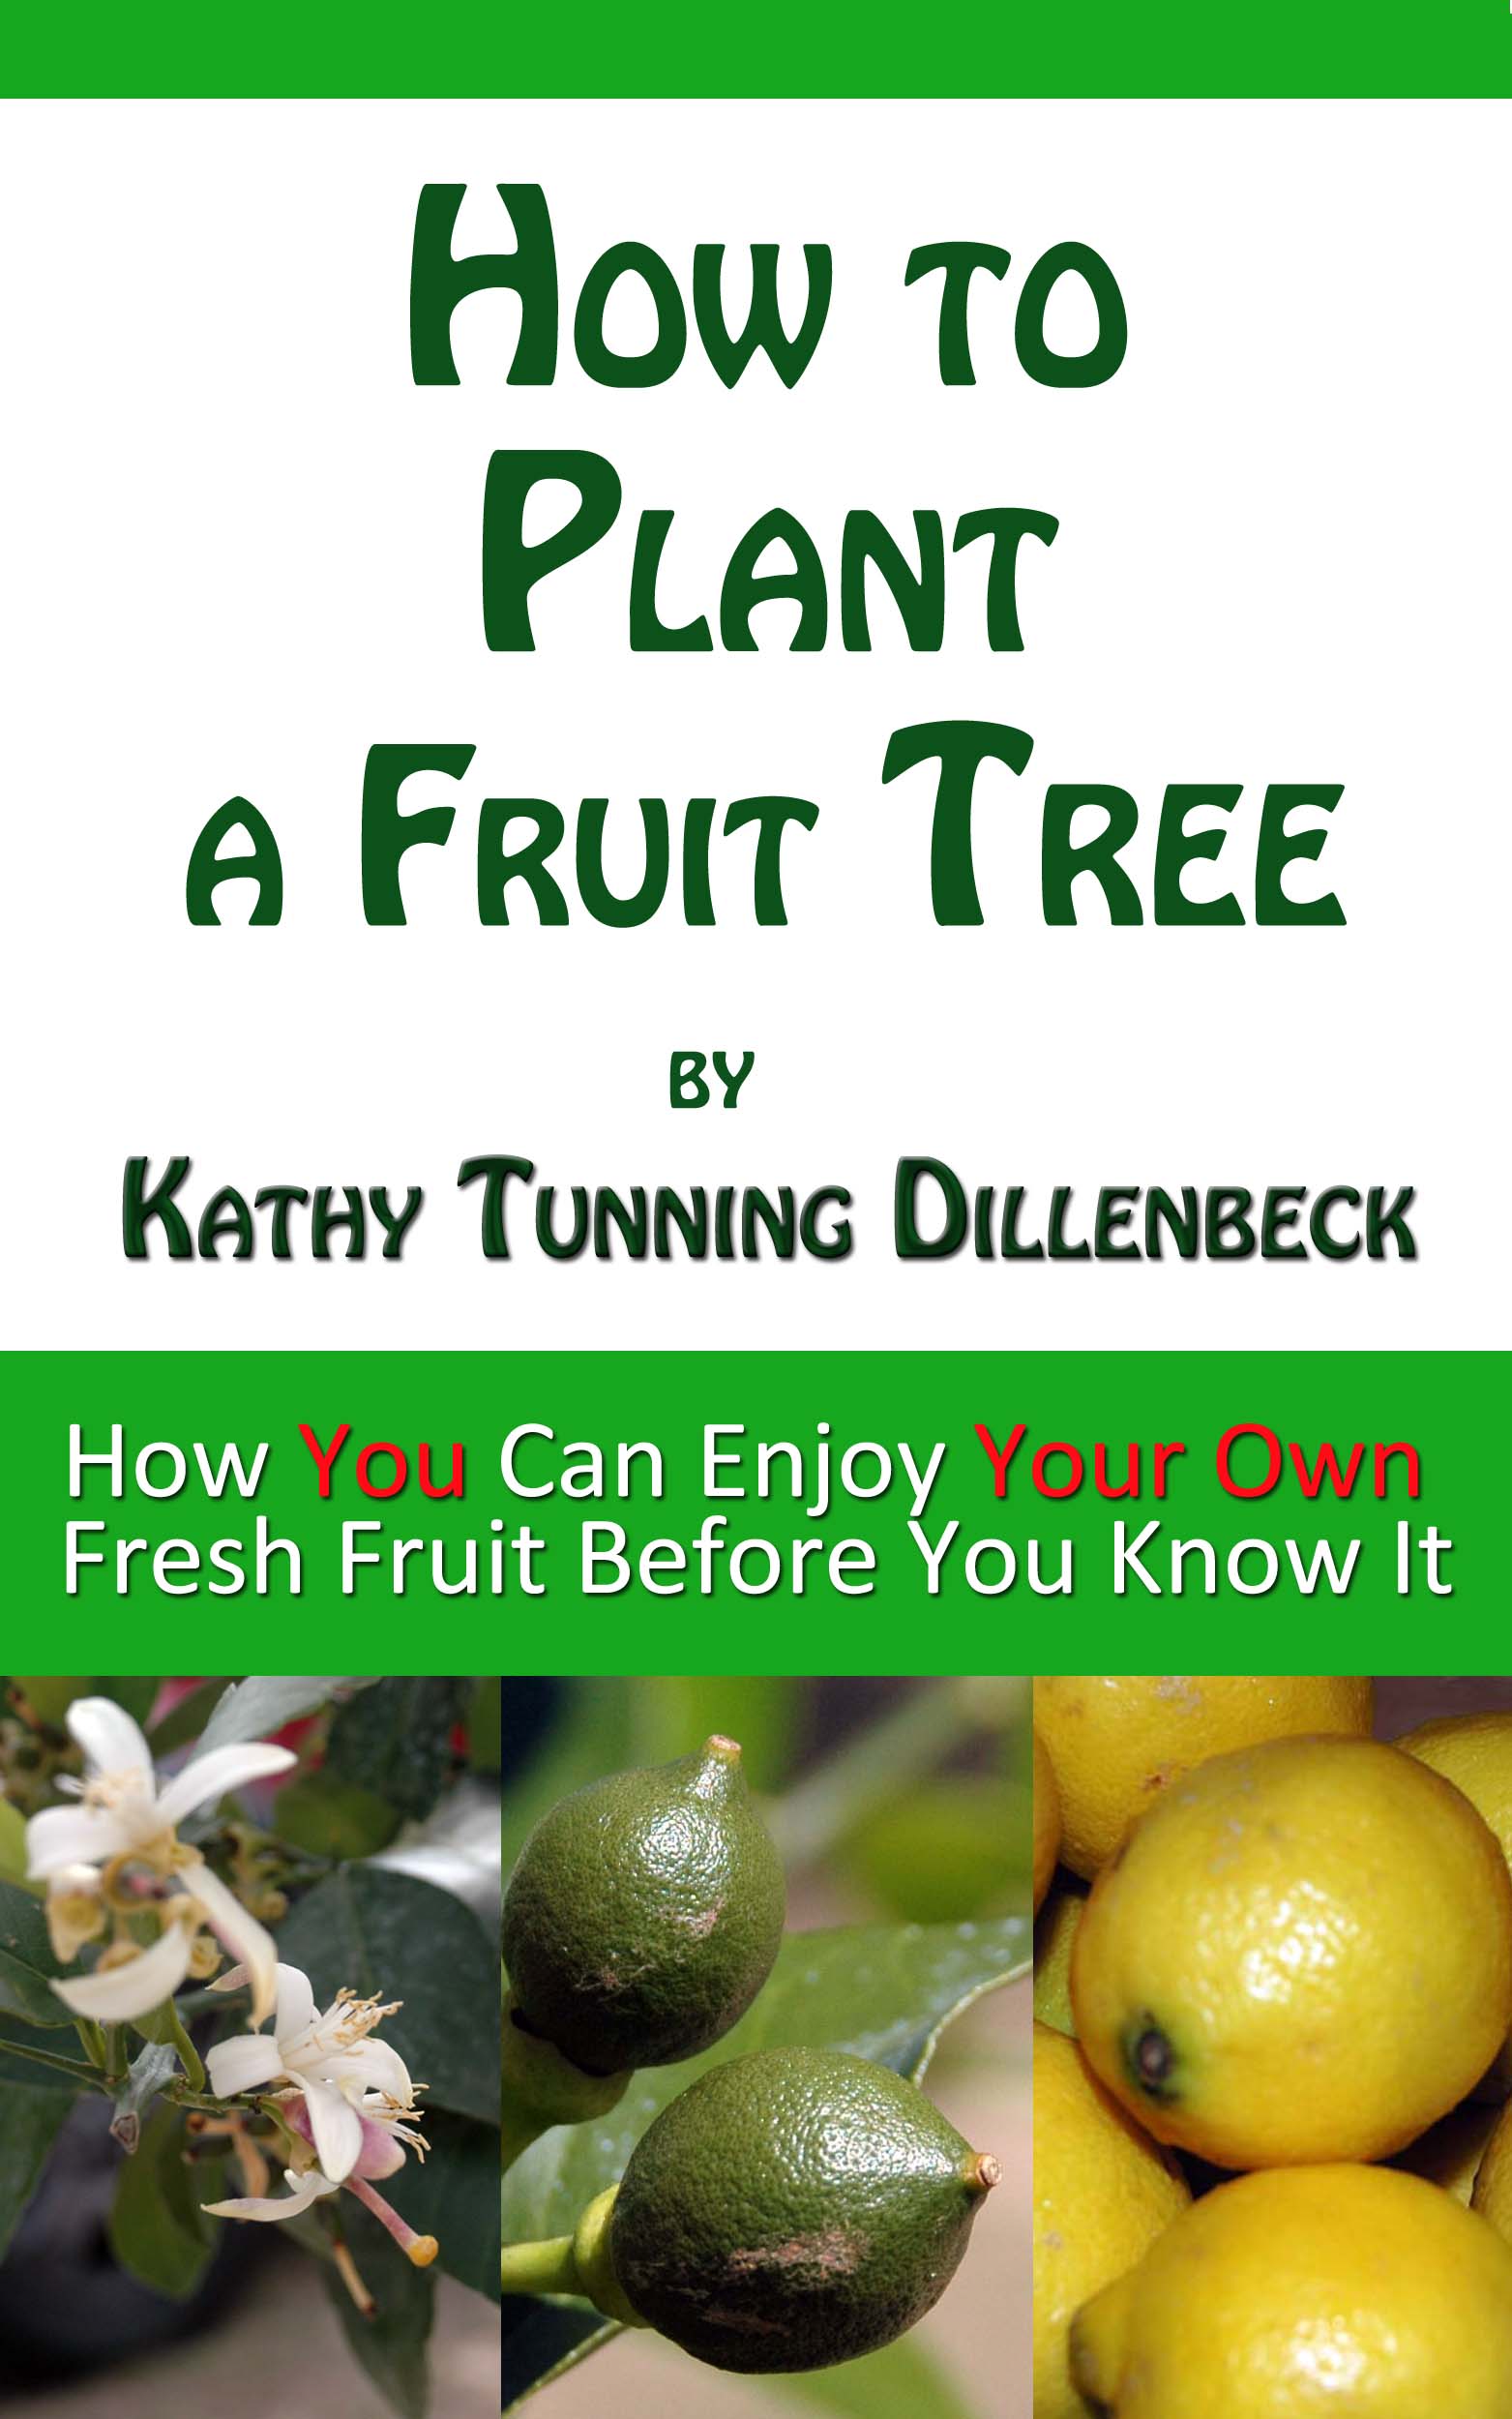 How to Plant a Fruit Tree